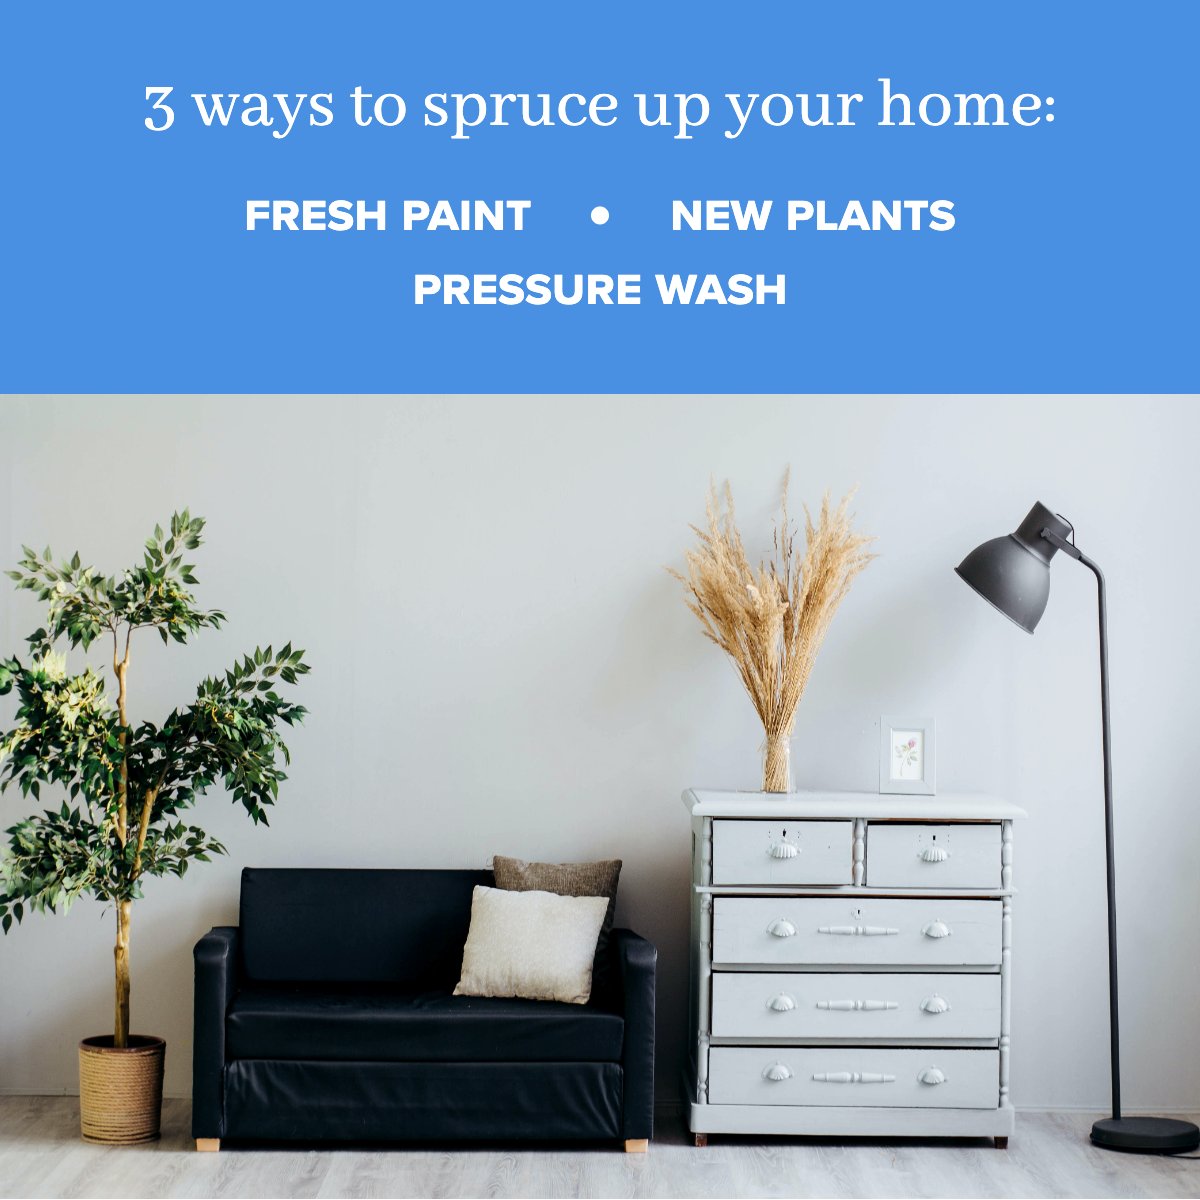 Try this tip to spruce up your home! 😎

Leave us your best design tip! 👇

#home    #spruce    #design    #modern    #realestate
#ChrisLeadsNC #LocalExpert #HereToHelp #MakingMovesMagic #HomeSmart #SmartHome #MoveToNC #RaleighNC #GreaterRaleigh